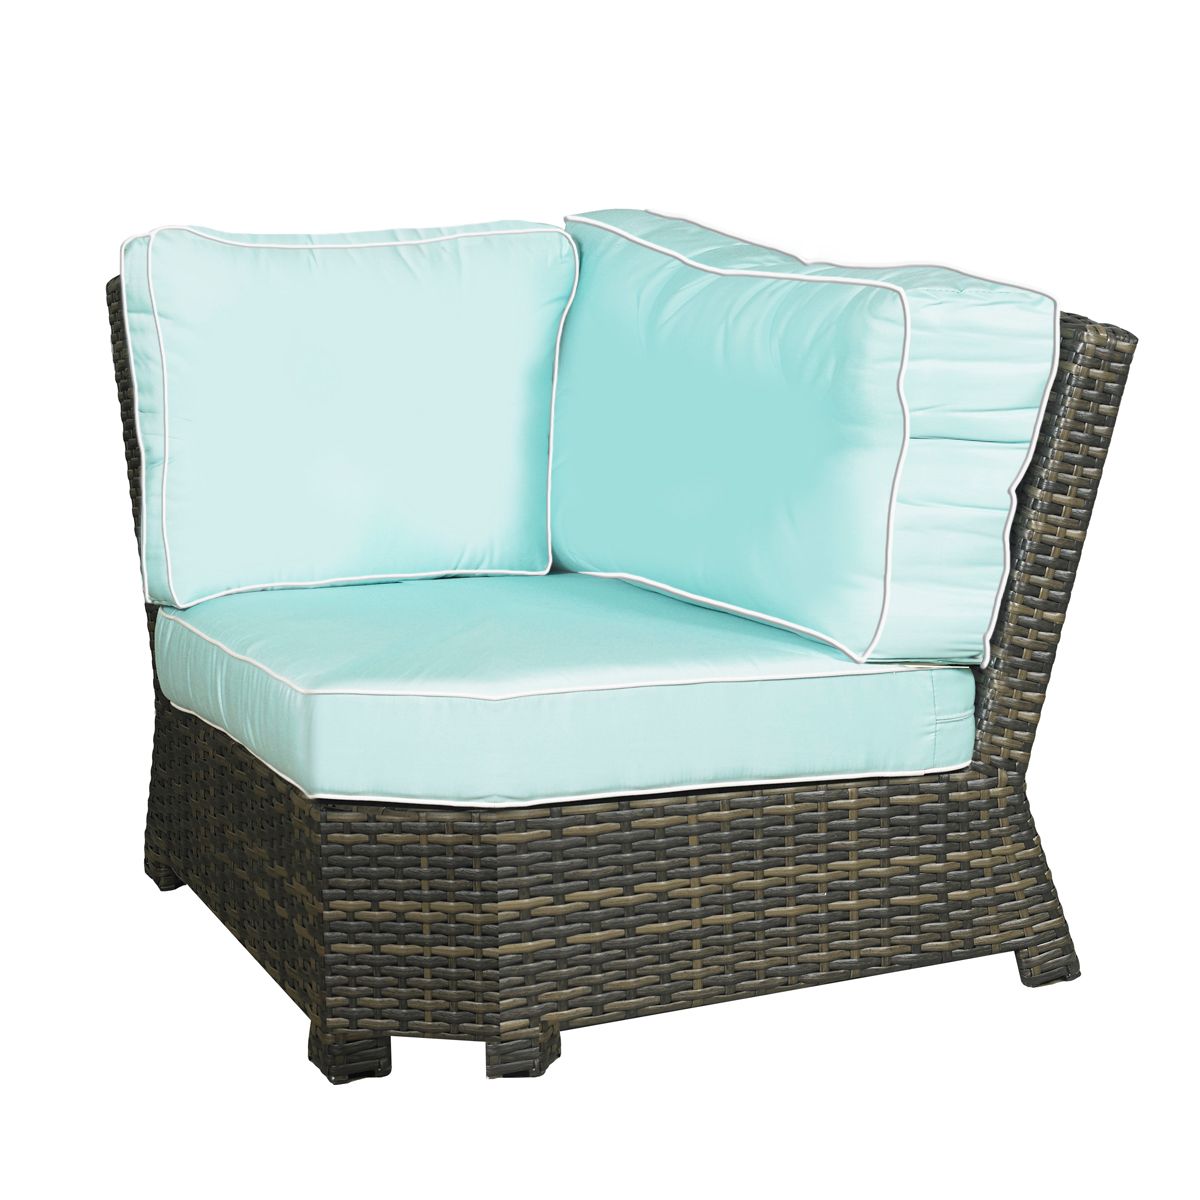 Forever Patio Brookside Wicker Rye Sectional 45 Degree Corner Lounge Chair